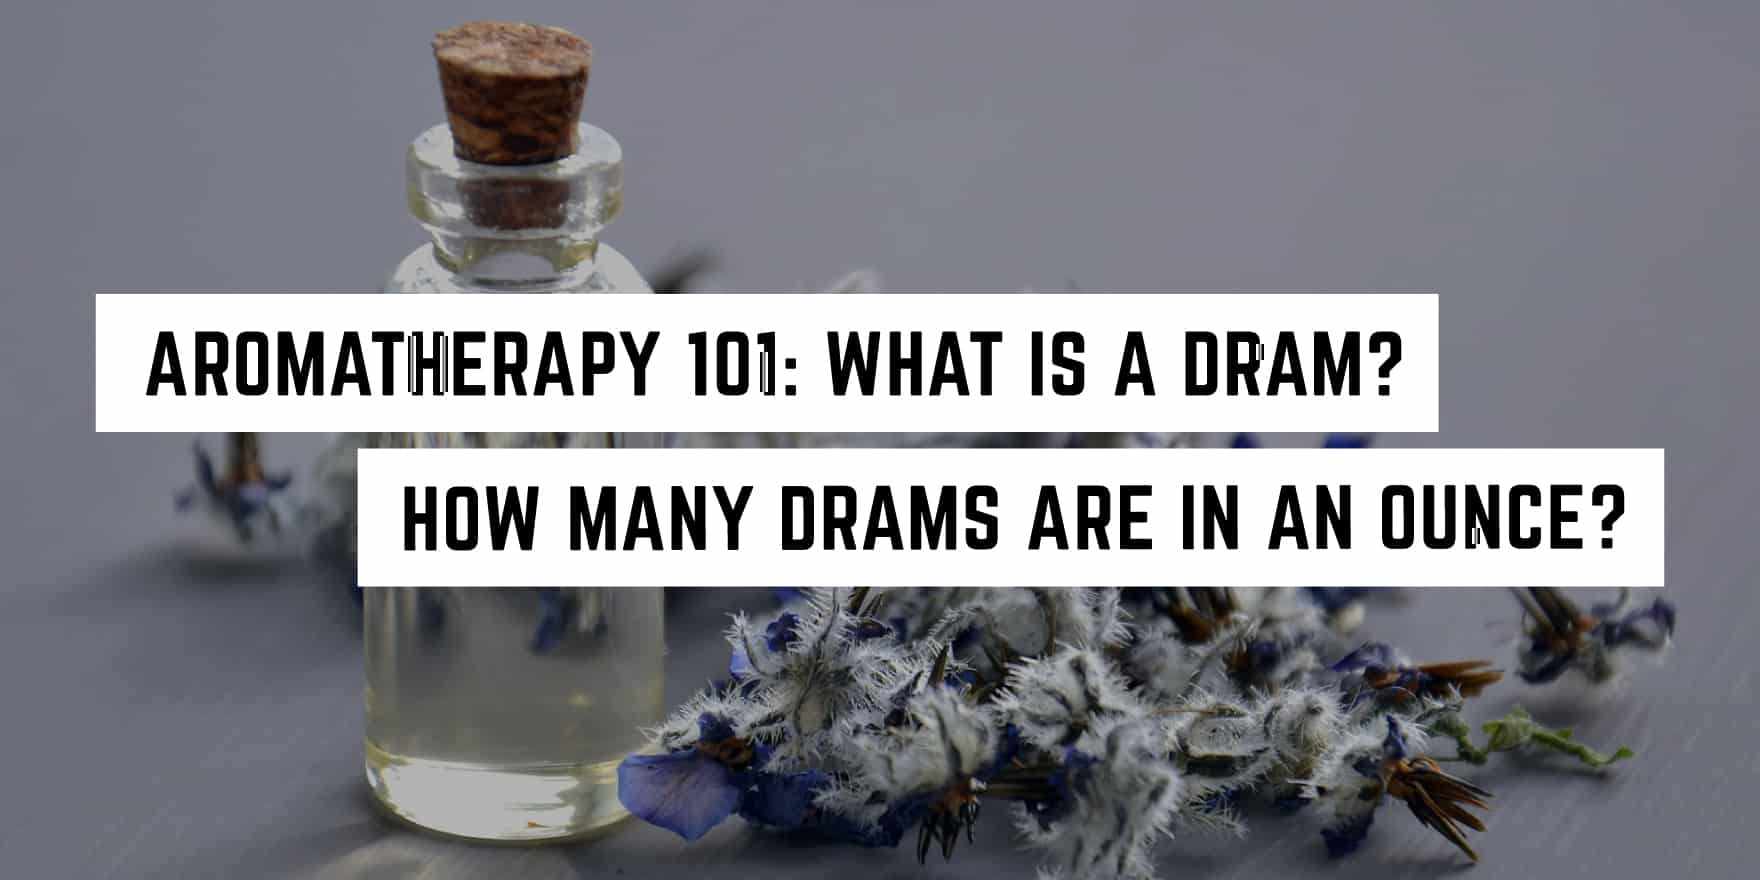 Aromatherapy 101: What is a Dram? How many drams are in an ounce?